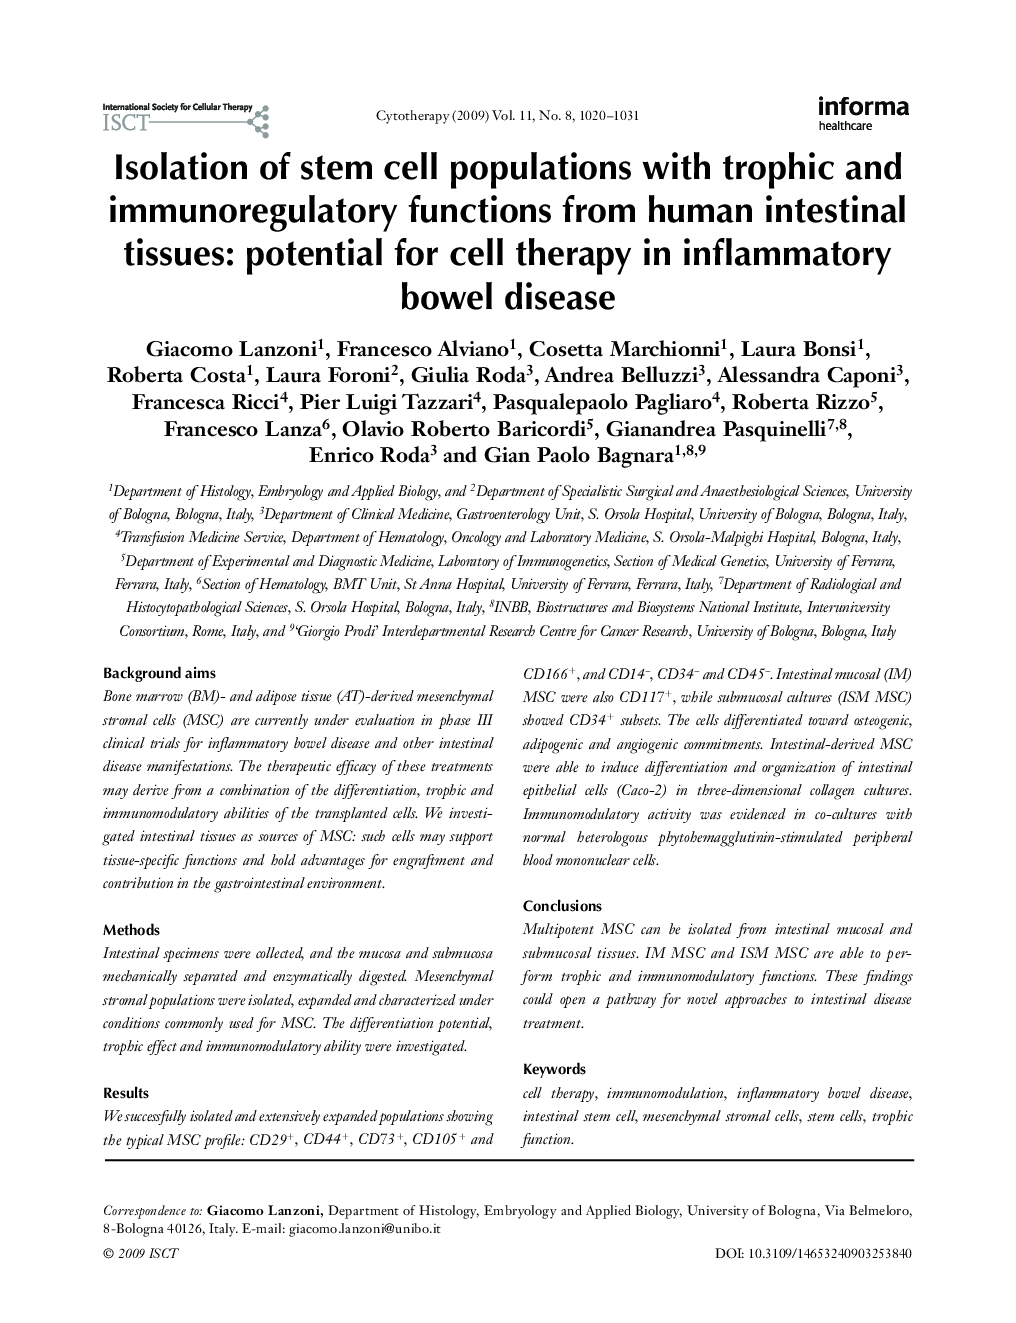 Isolation of stem cell populations with trophic and immunoregulatory functions from human intestinal tissues: potential for cell therapy in inflammatory bowel disease